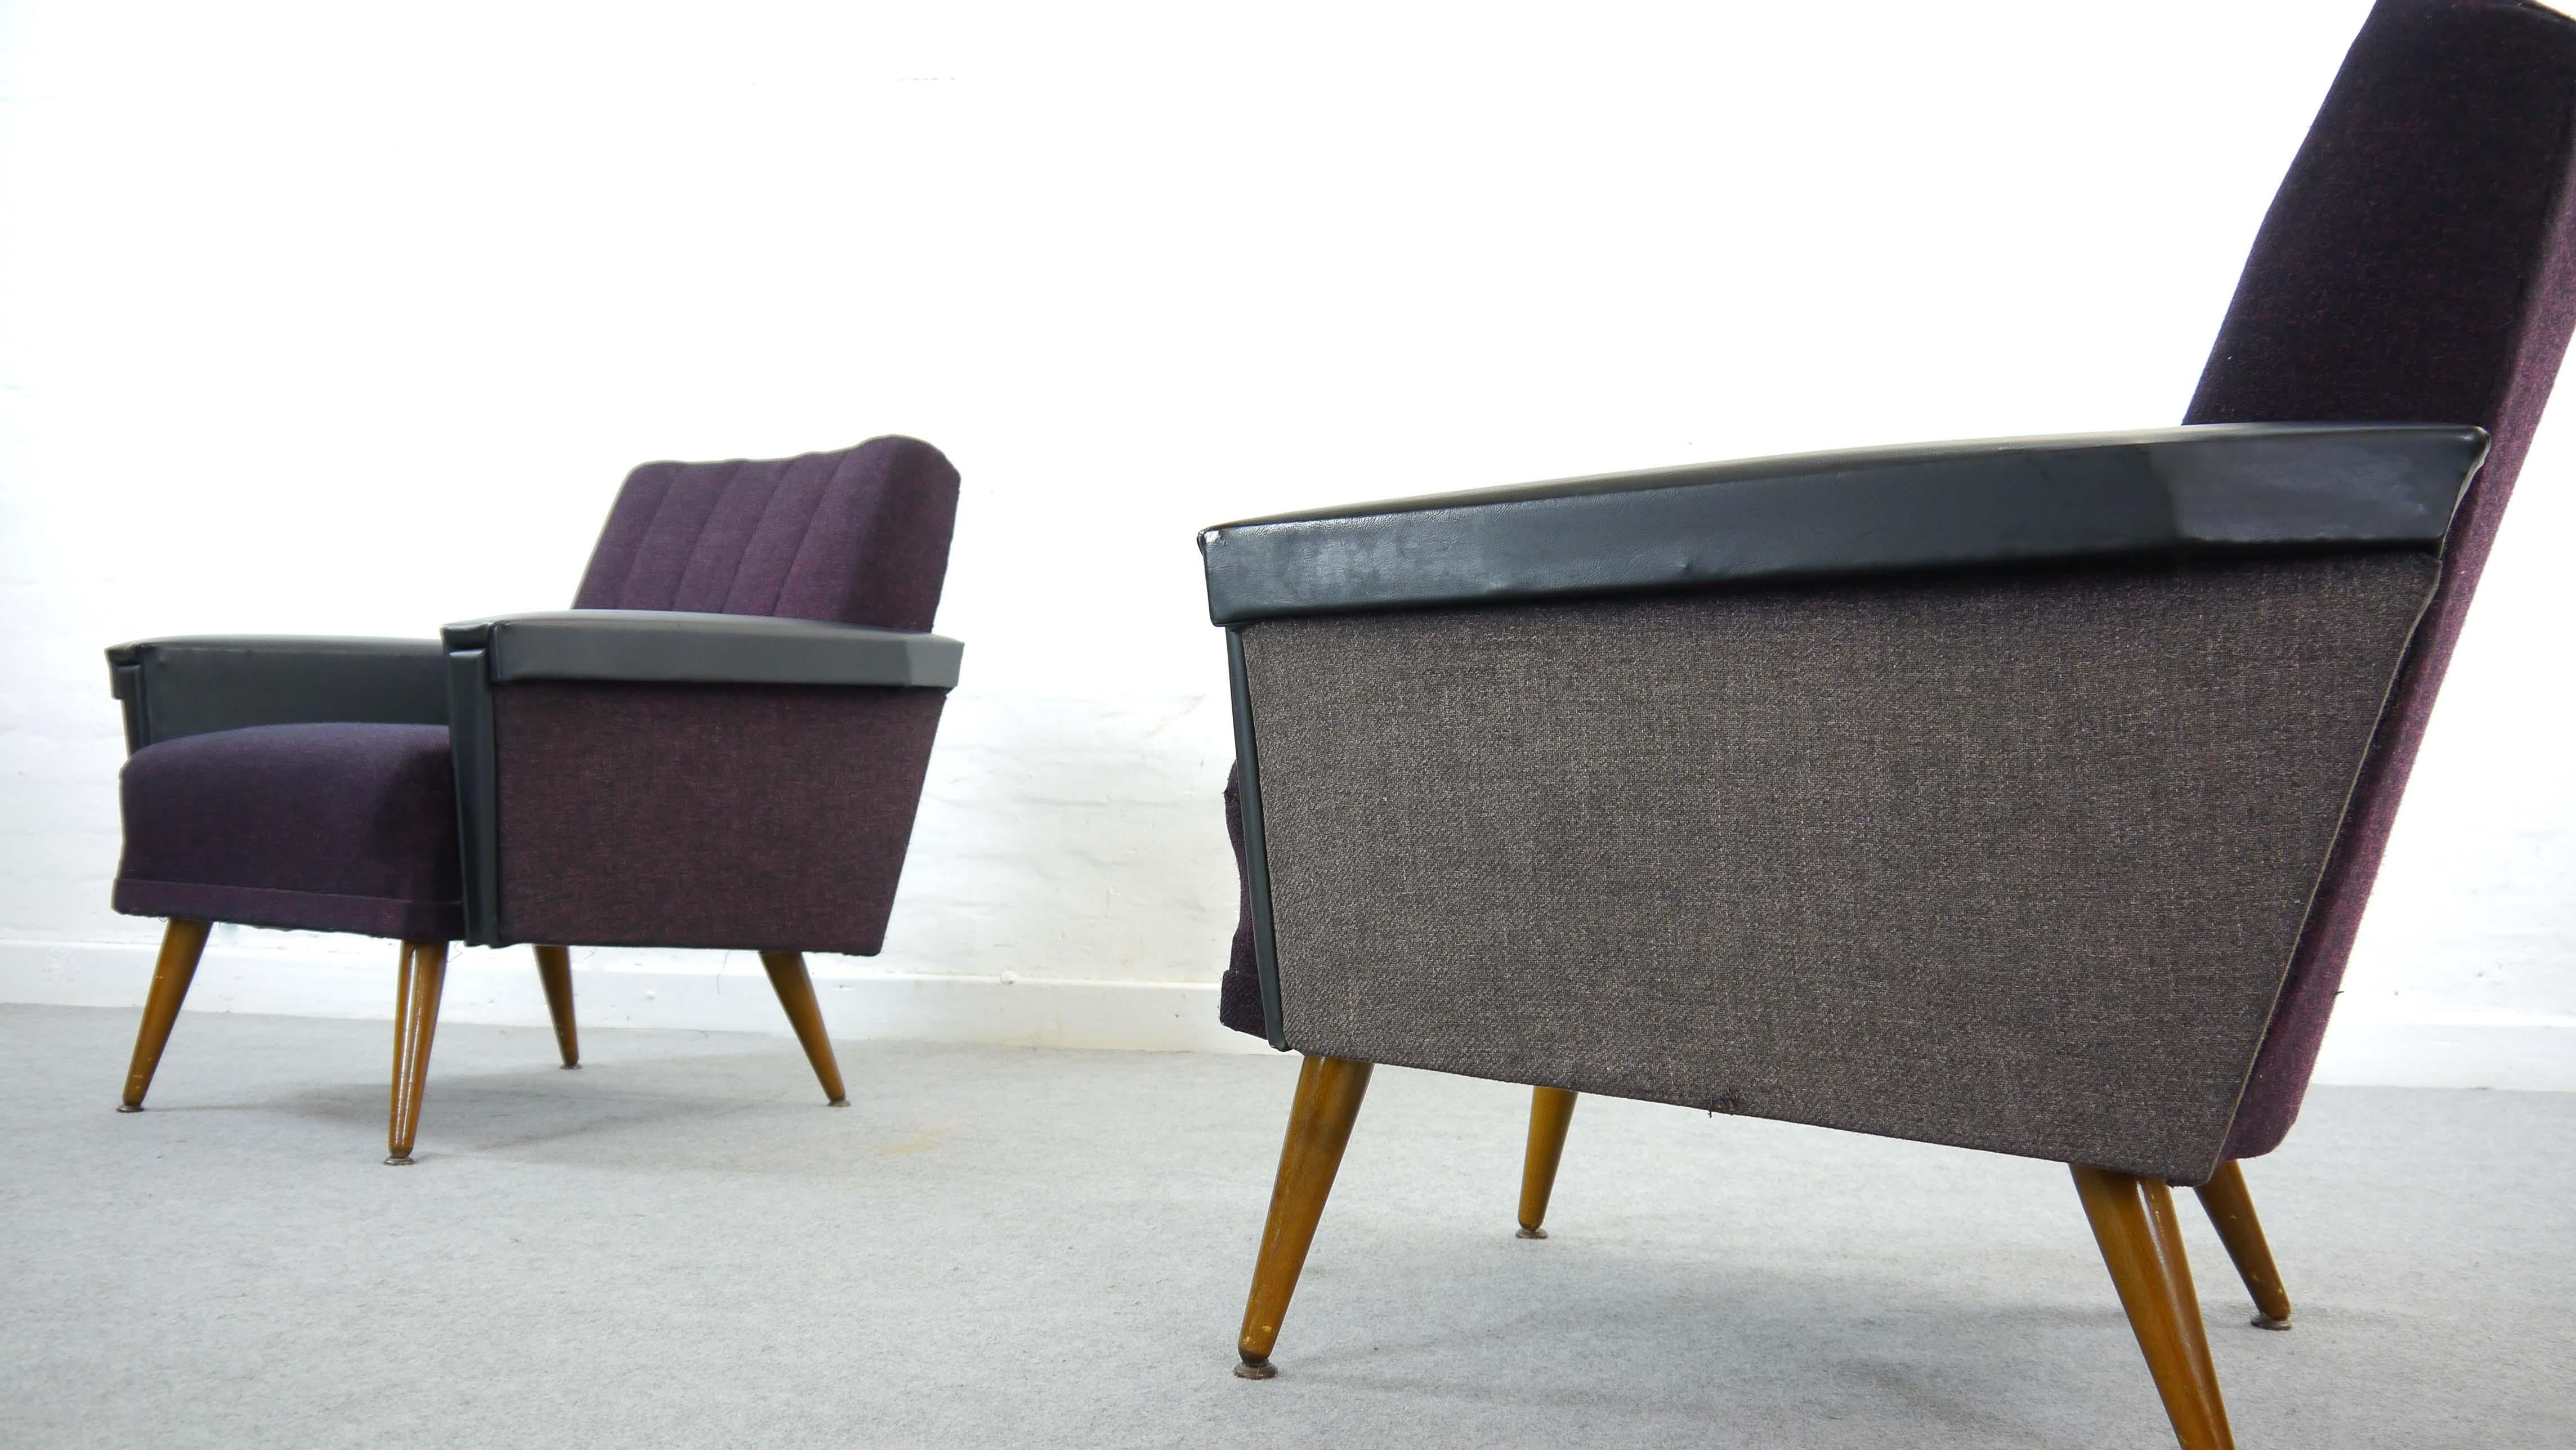 Mid-20th Century Vintage Pair of Midcentury Cocktail Chairs or Club Chairs in Purple-Black, 1950s For Sale